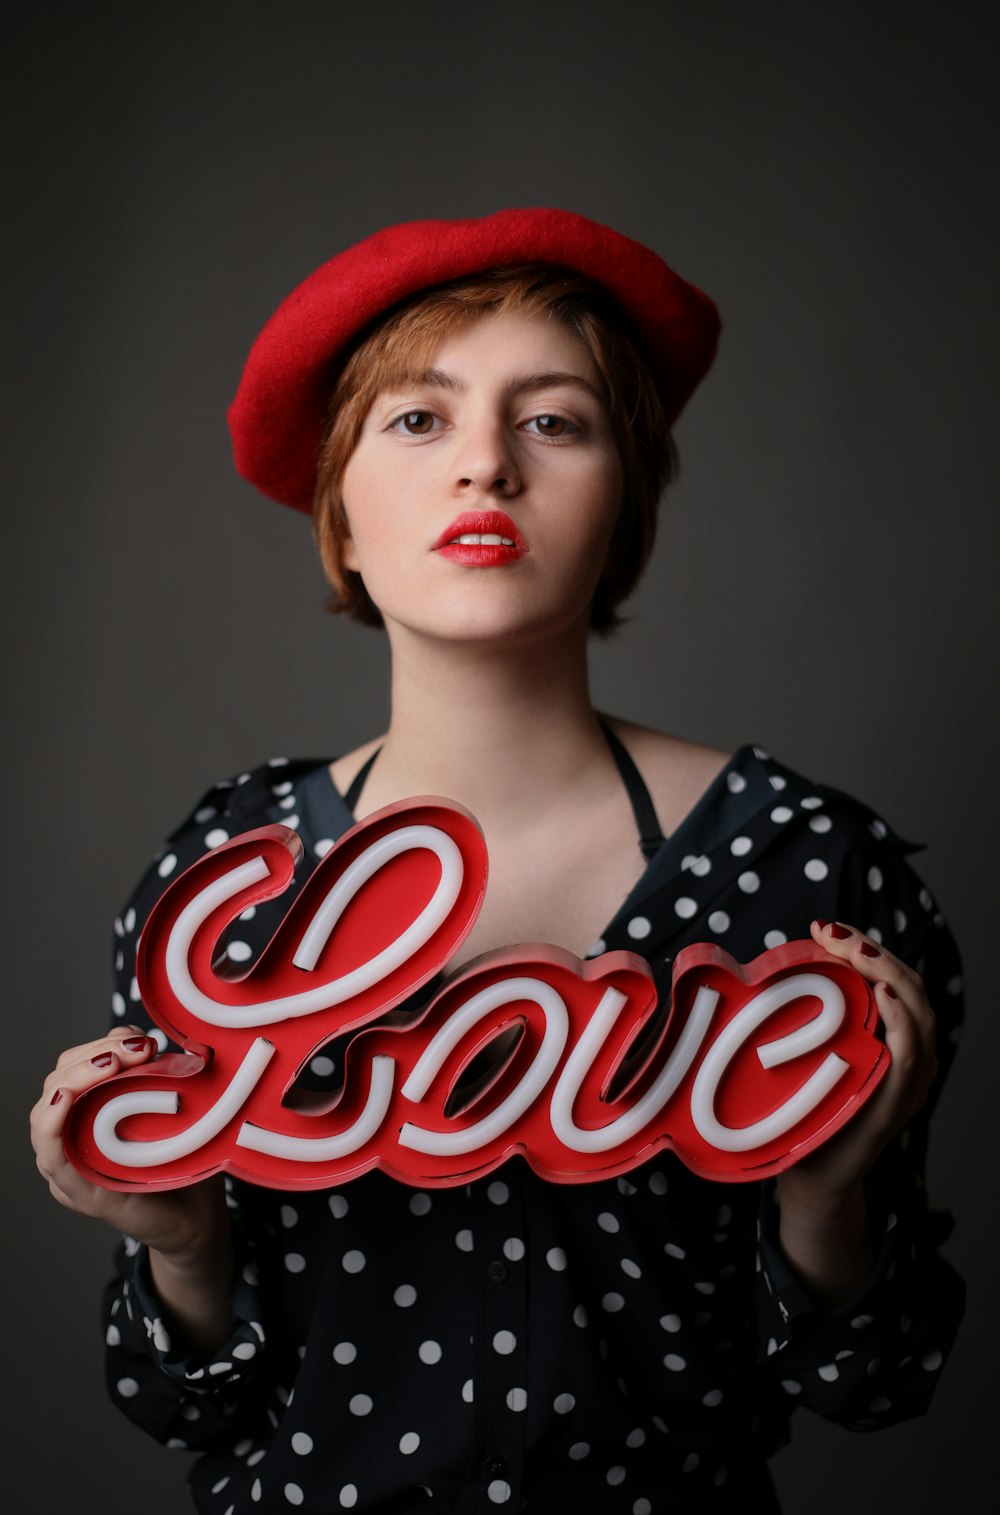 woman wearing black and white polka-dot top holding love freestanding letter